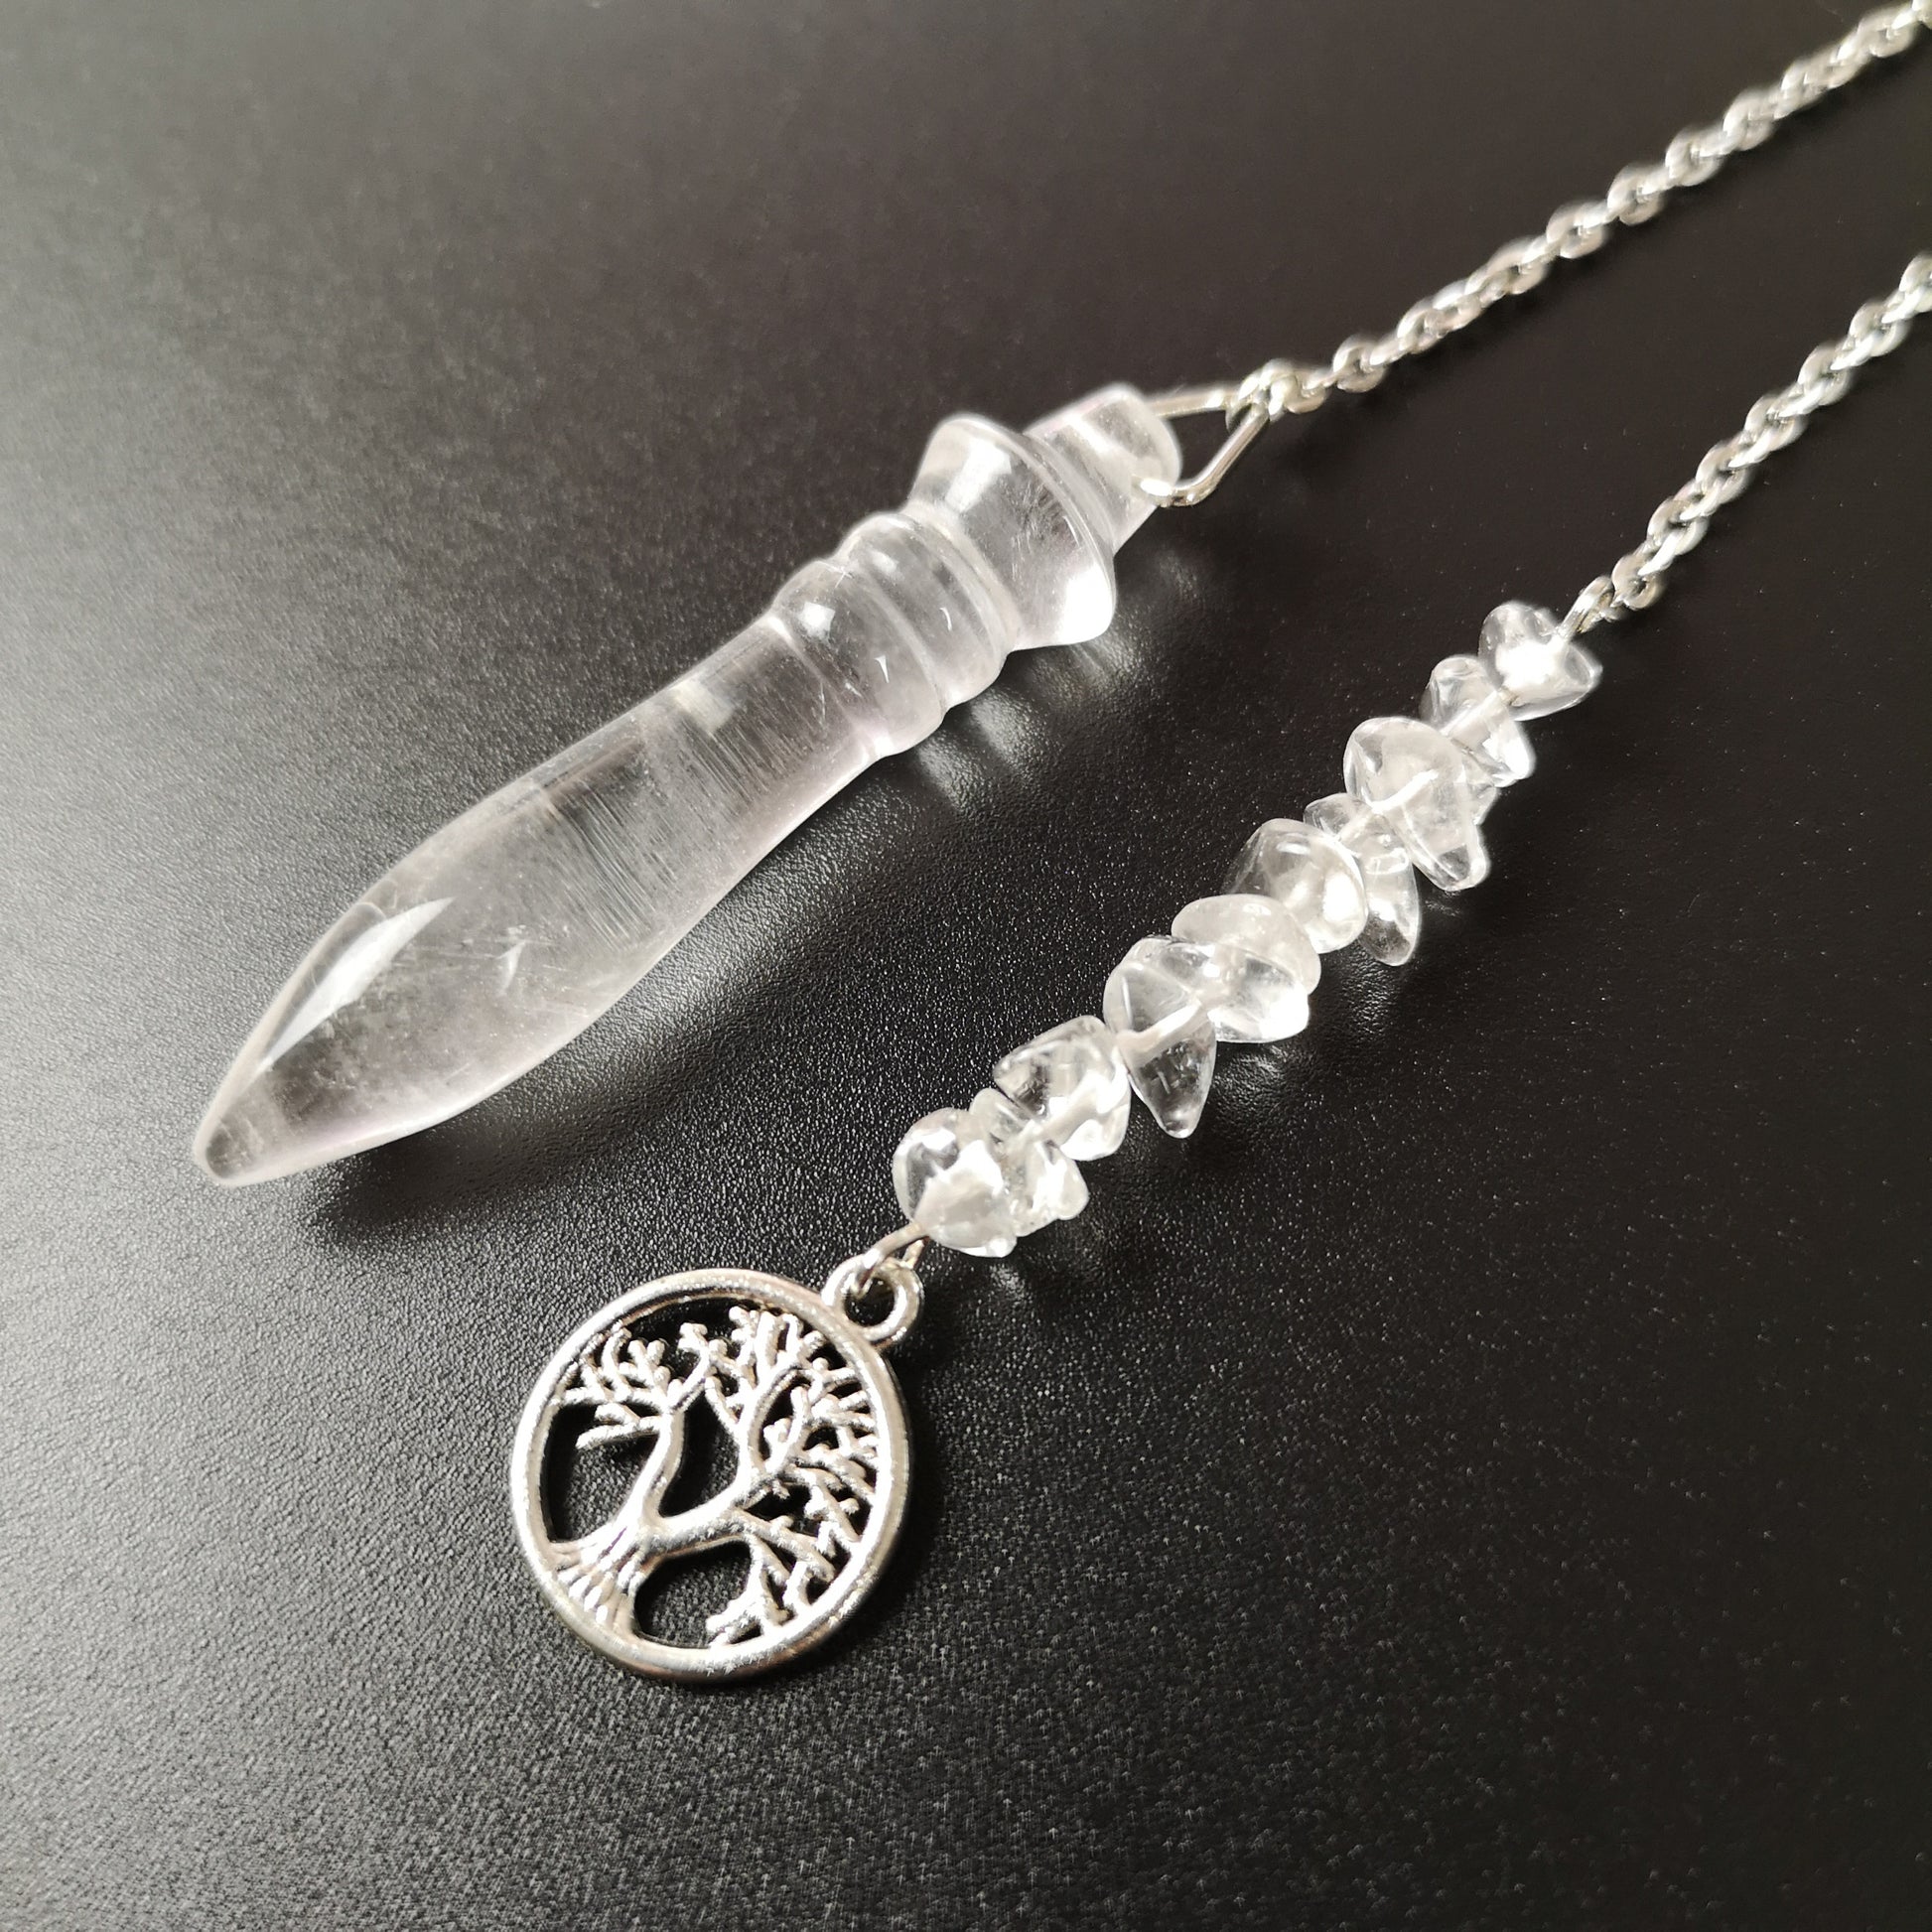 Egyptian Thot pendulum clear quartz and tree of life - The French Witch shop